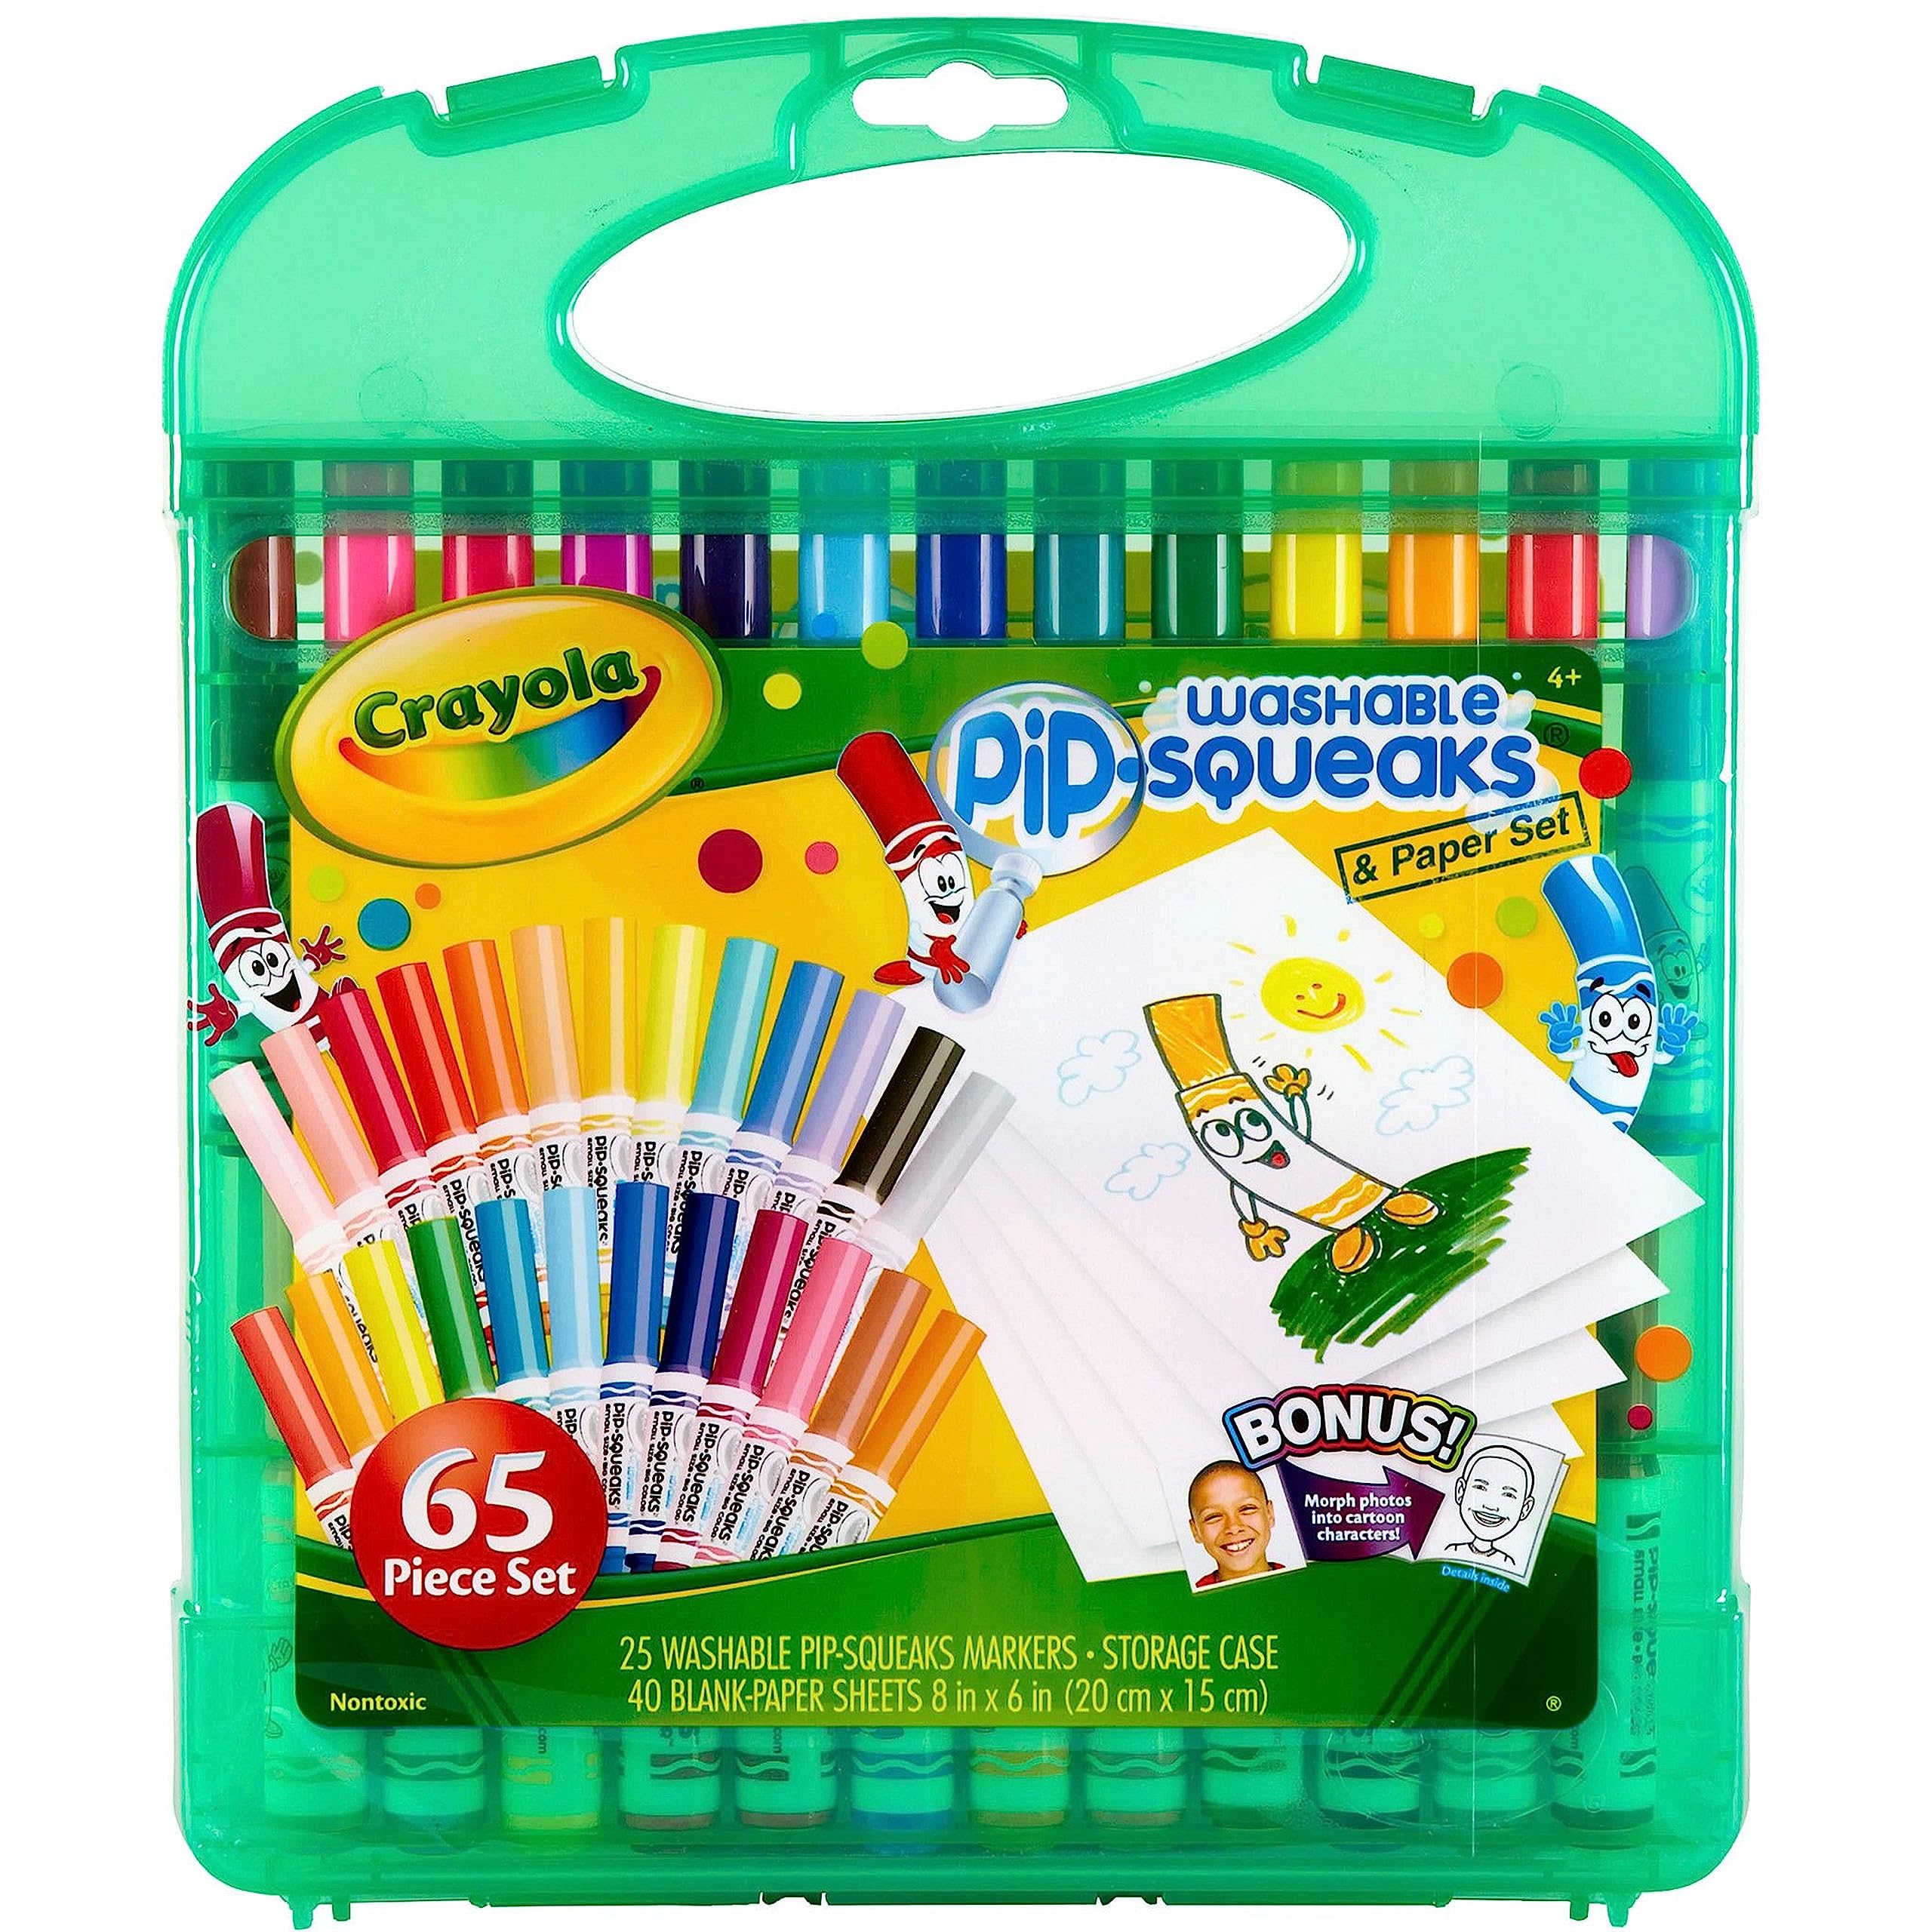 Crayola Pip Squeaks Marker Set (65ct), Washable Markers for Kids, Kids Art Supplies, Holiday Gift for Kids, Mini Markers, Stocking Stuffer, 4+